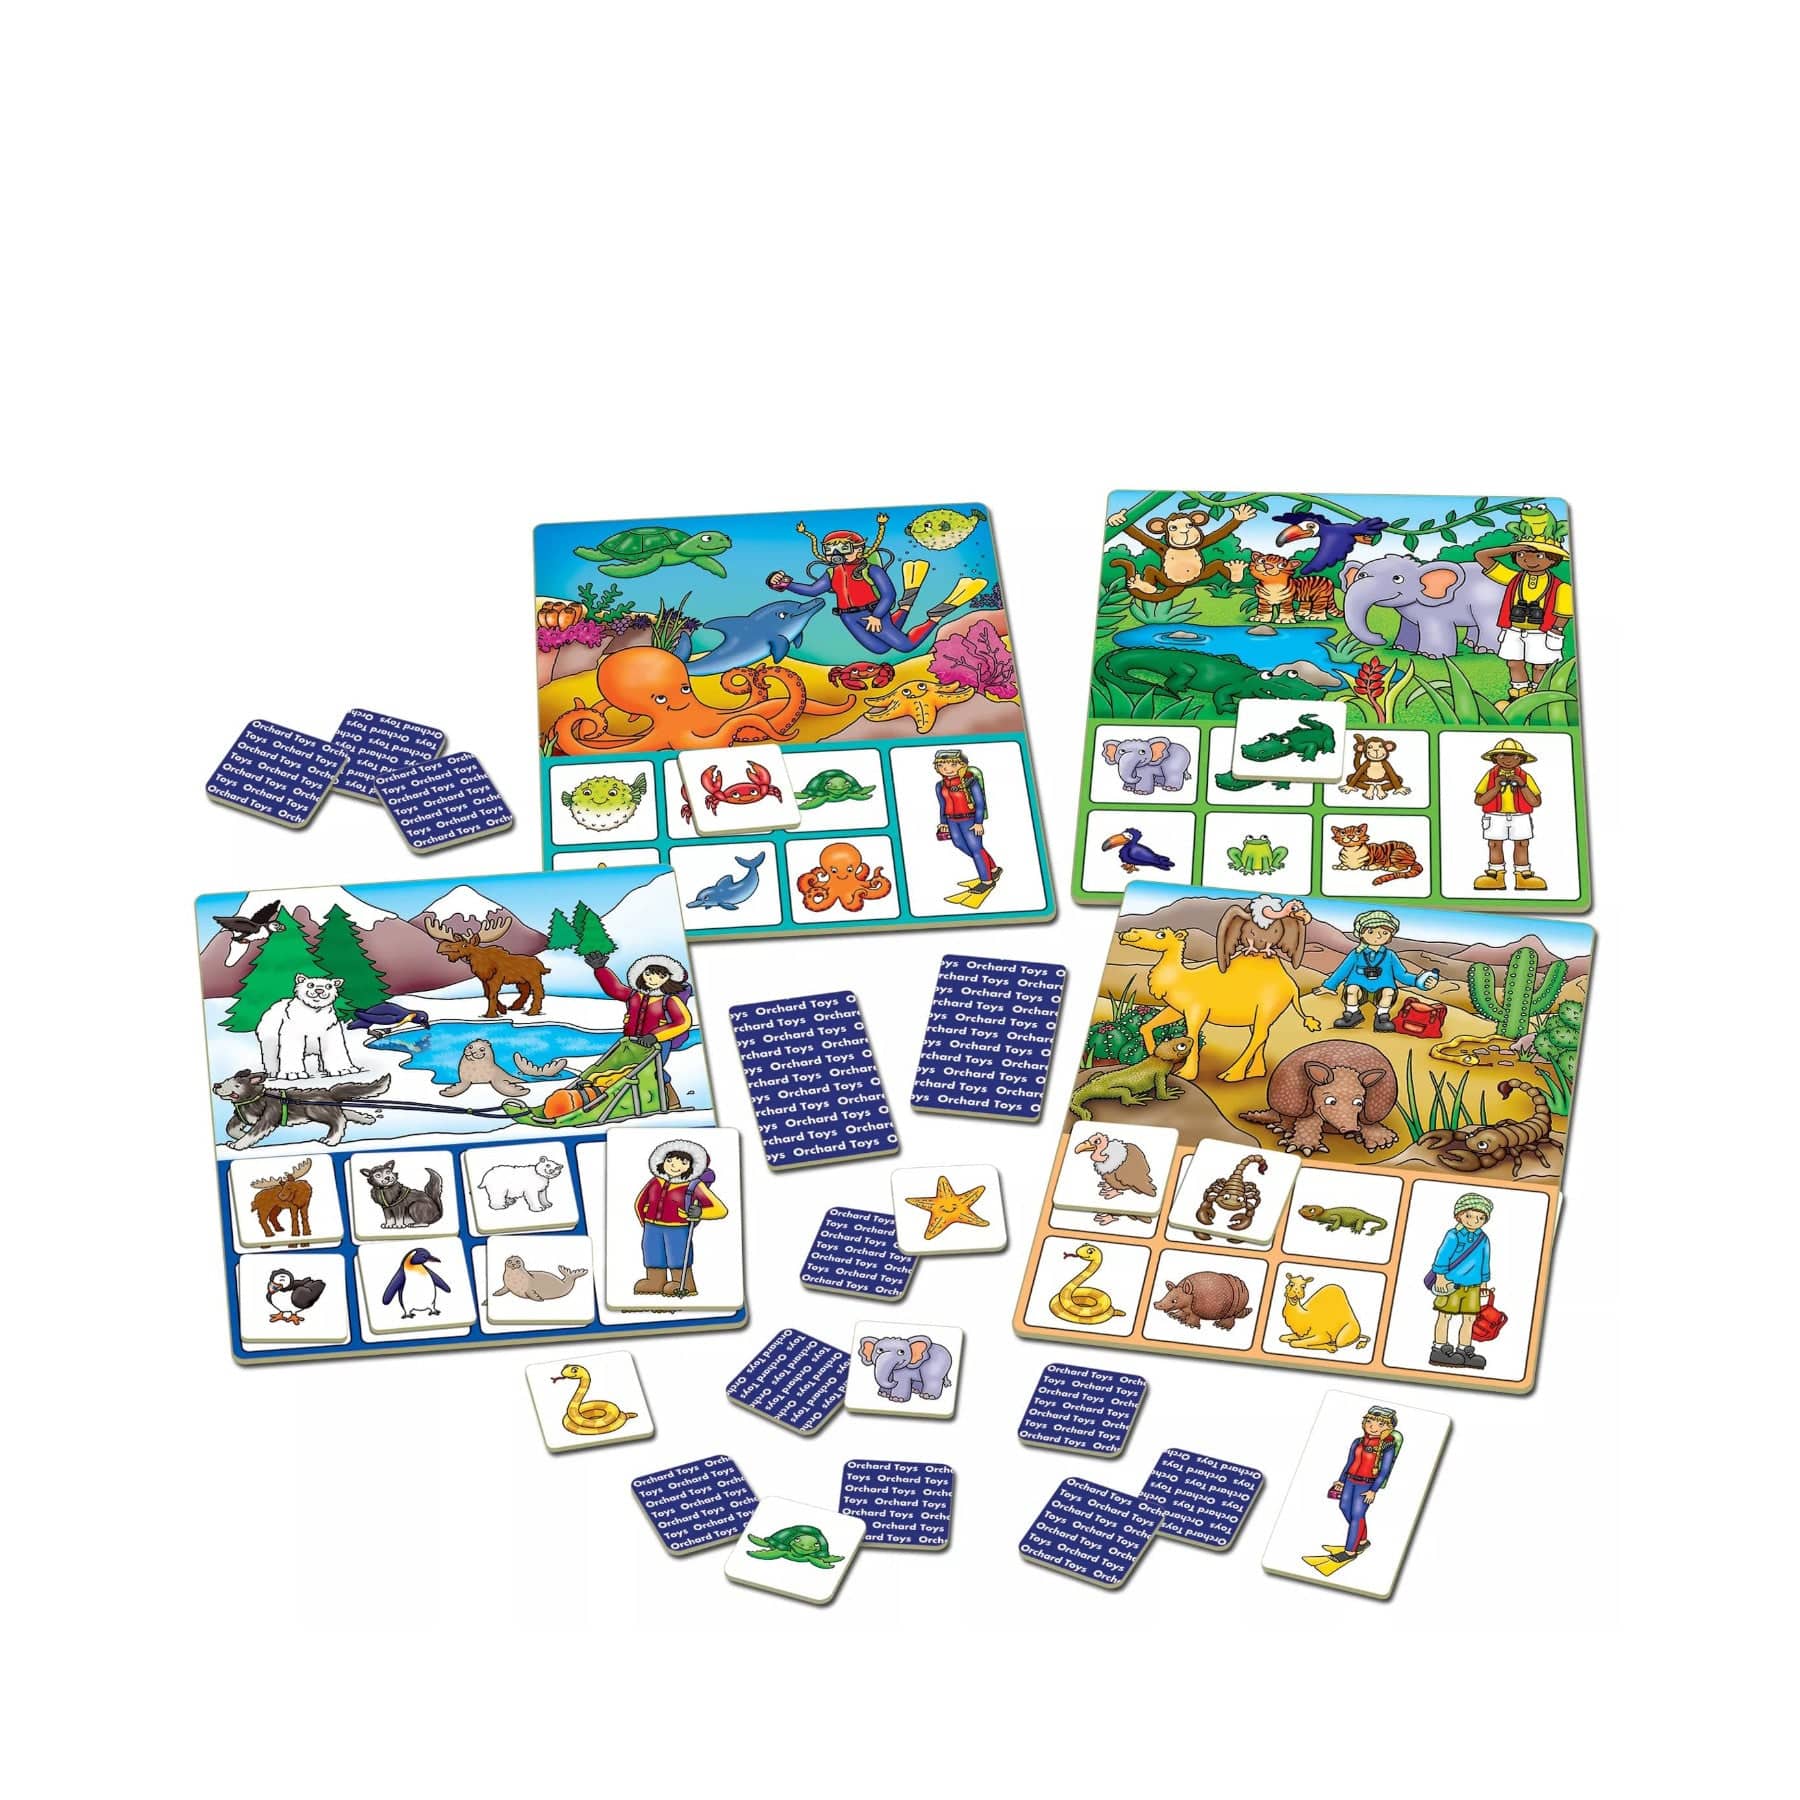 Educational children's board game with colorful illustrations showing animals, habitats, and people, including puzzle pieces and question cards on a white background.